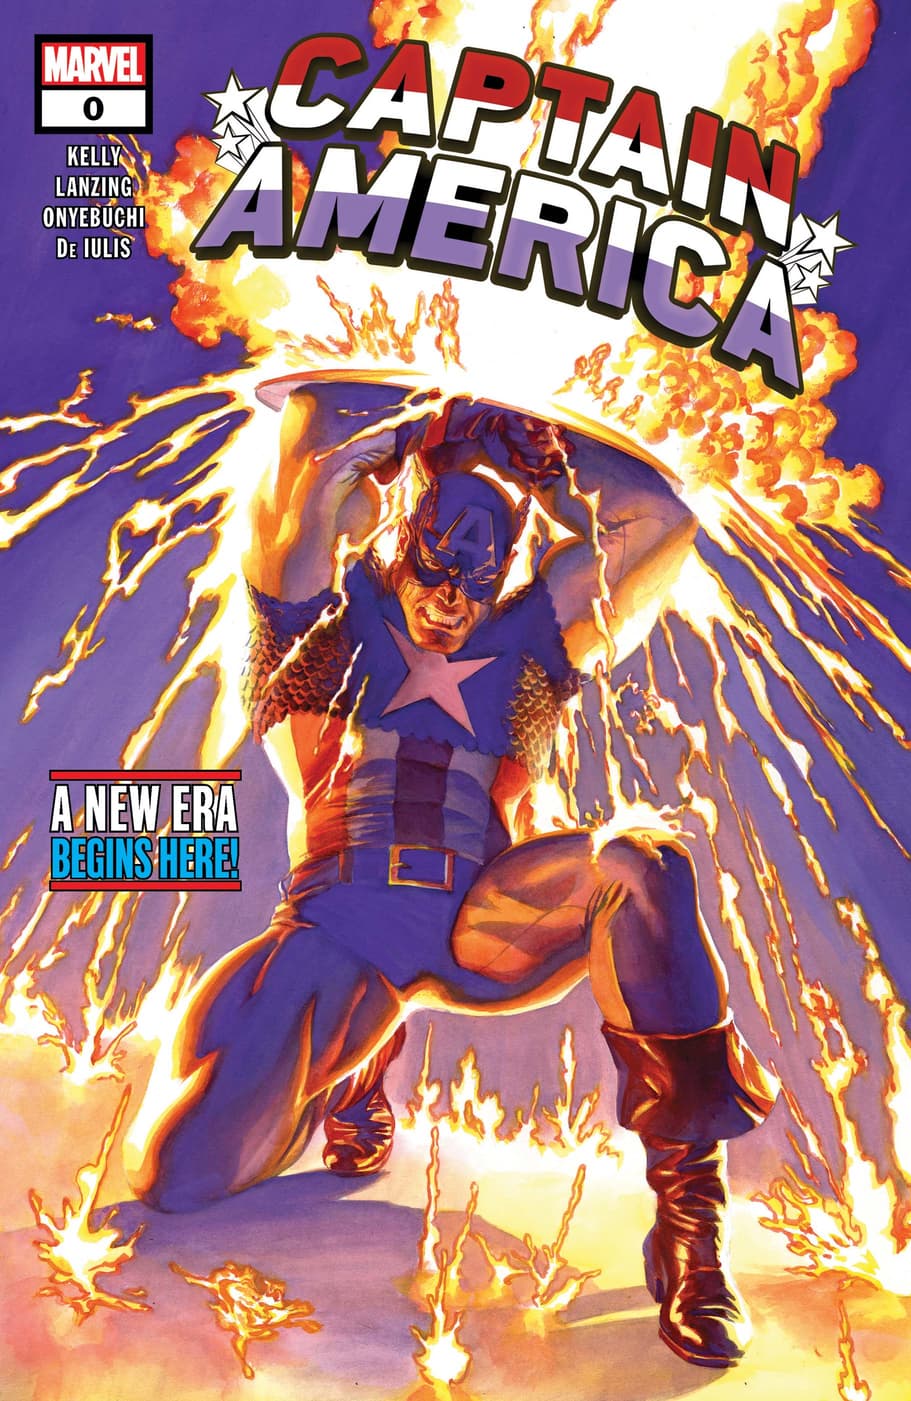 CAPTAIN AMERICA #0 cover by Alex Ross